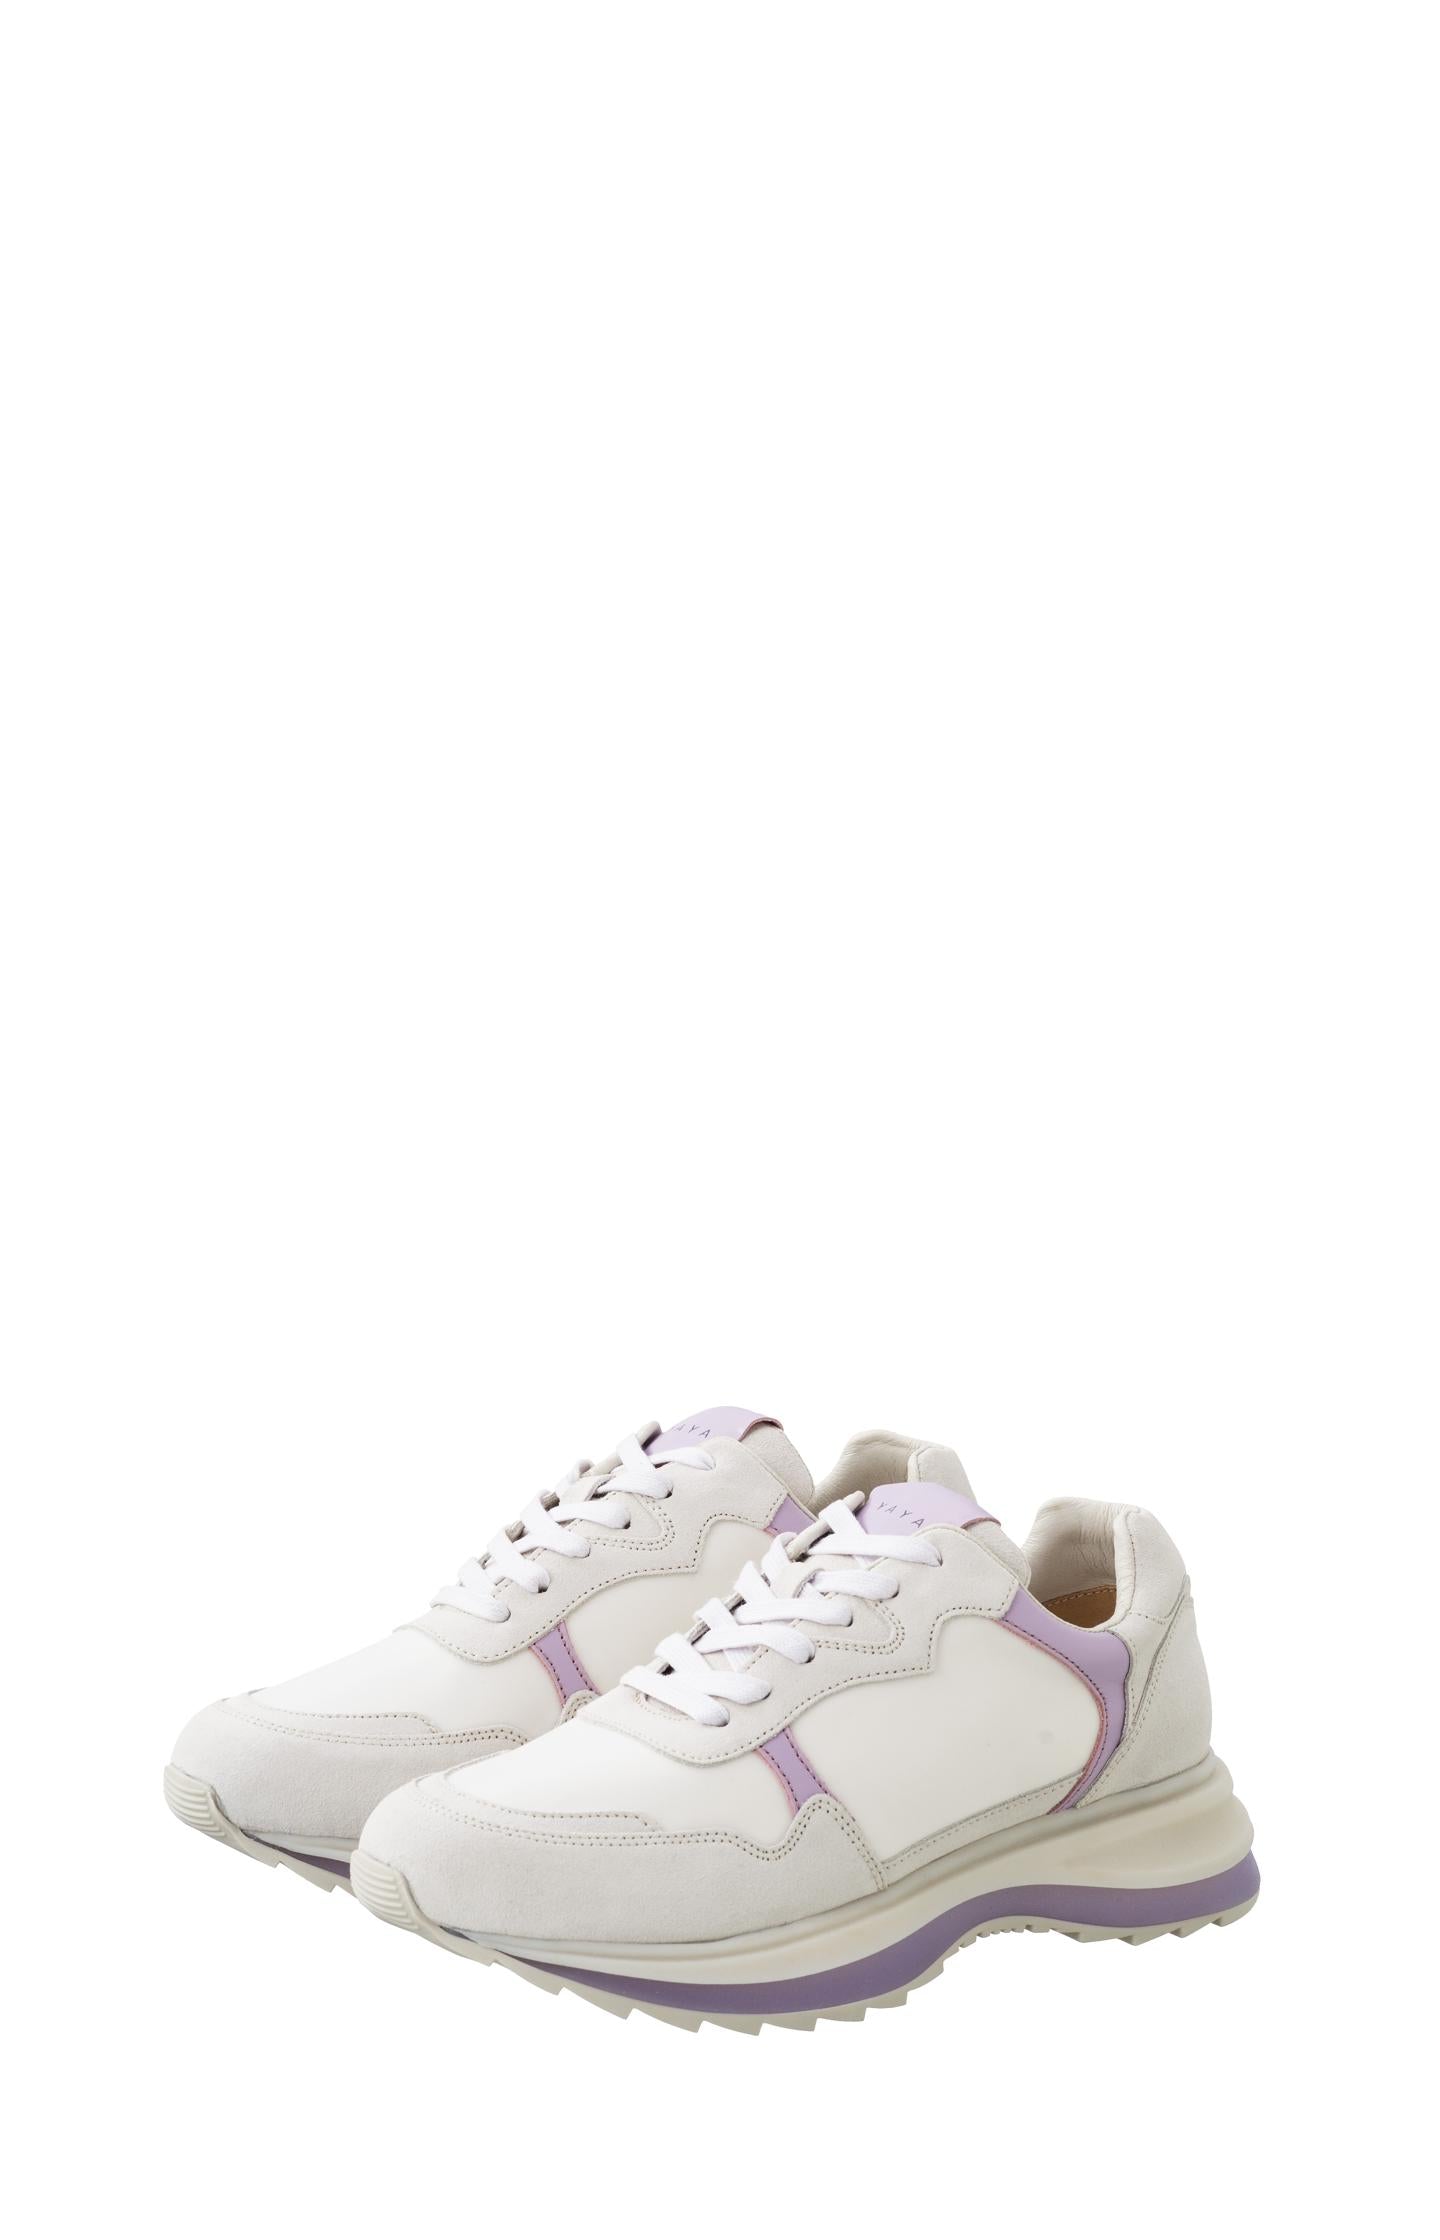 Leather sneaker with lace up style and sole details - Orchid Petal Purple - Type: product